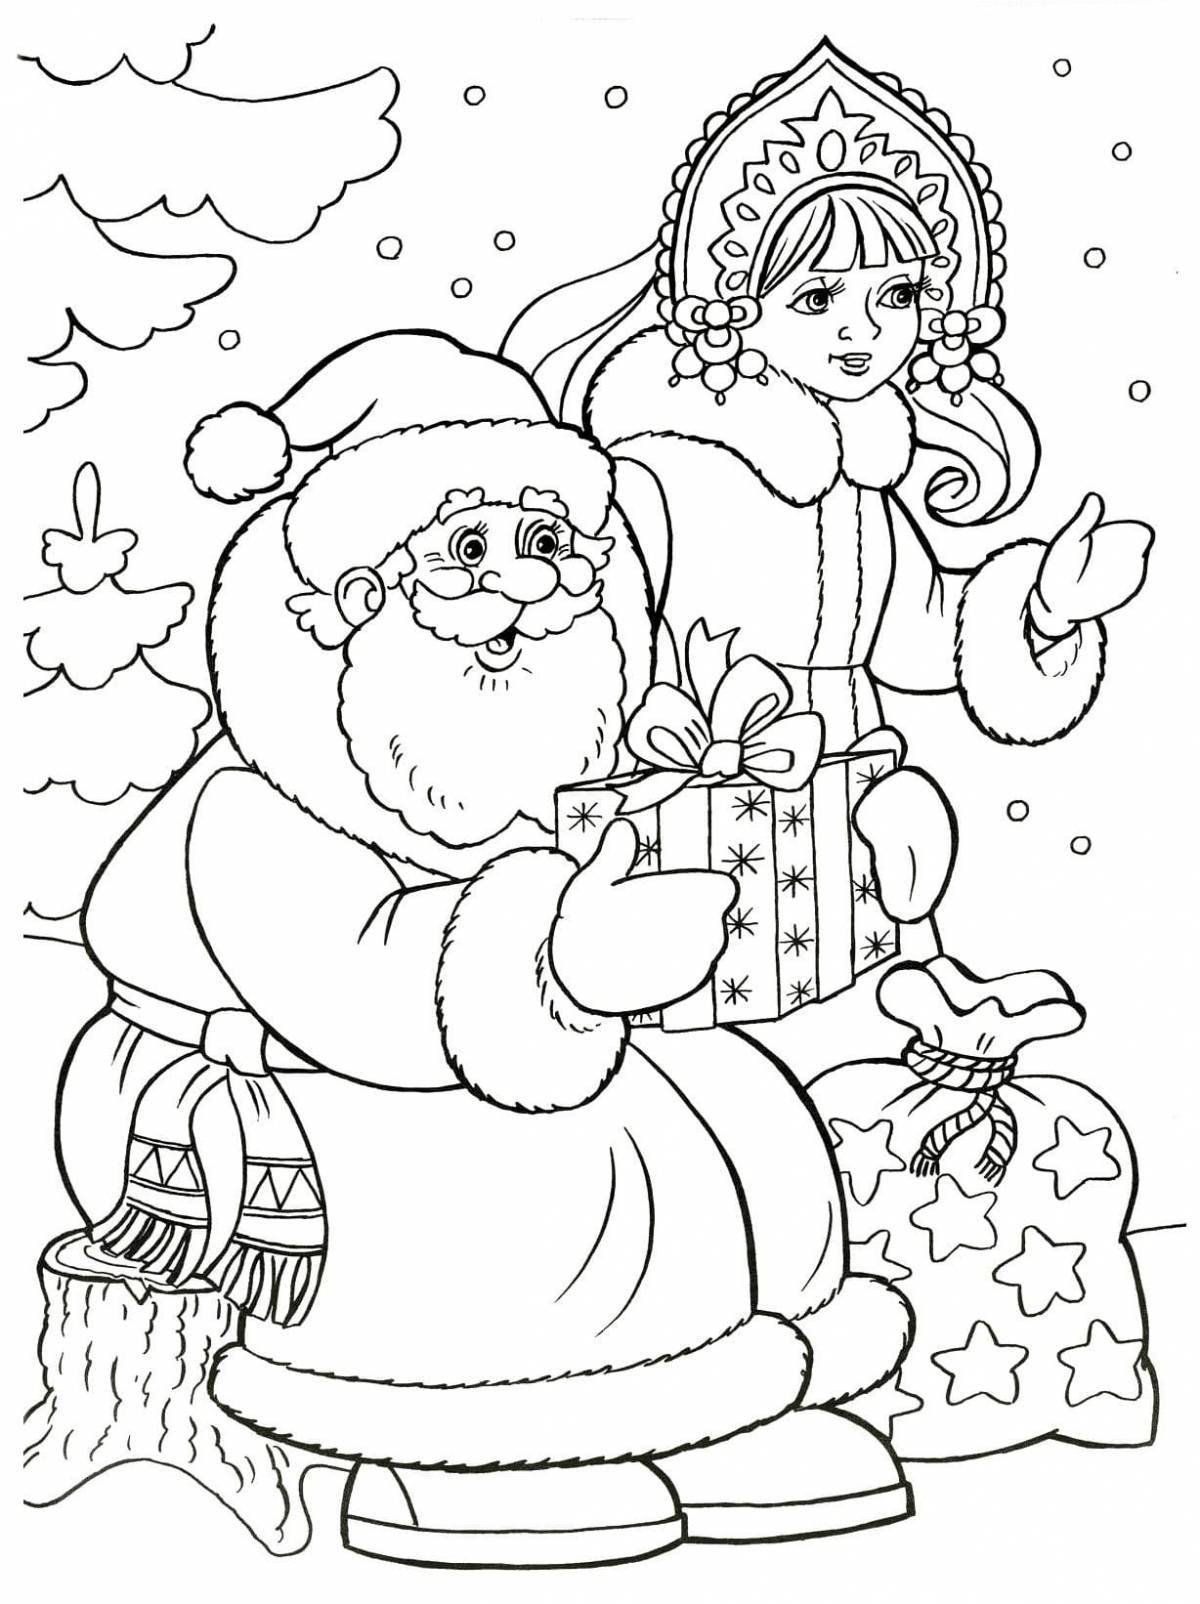 Playful coloring Christmas pictures for kids